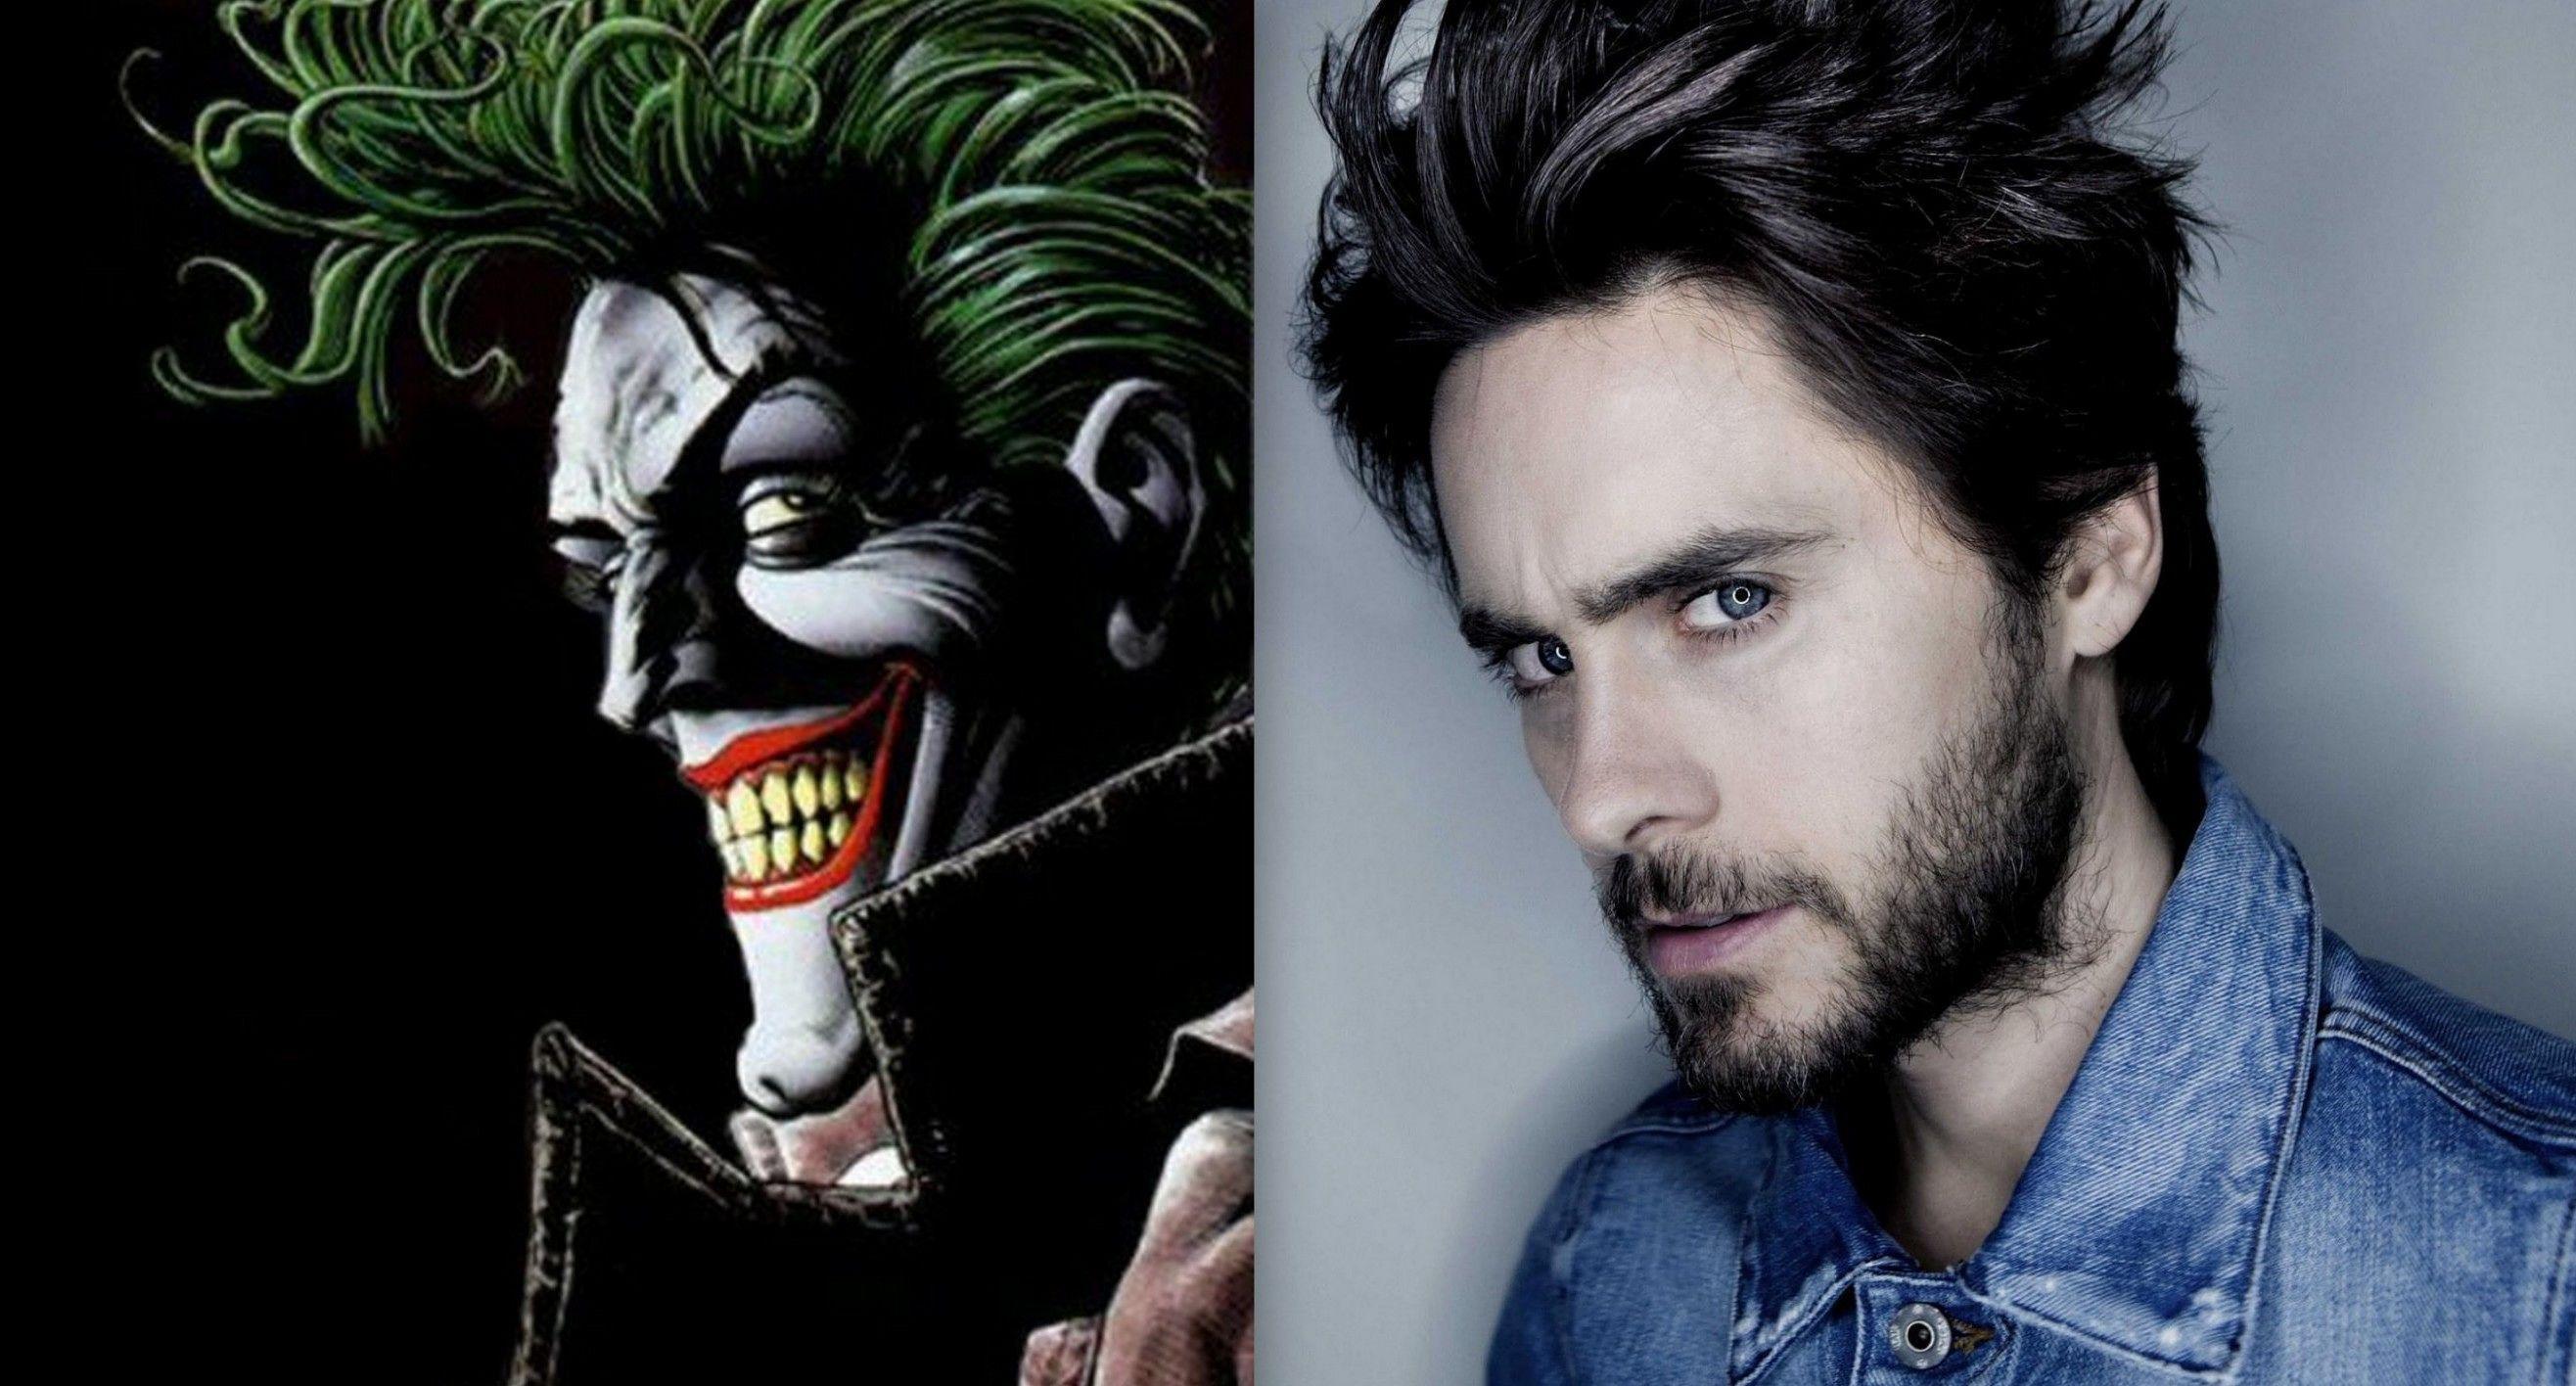 Joker Jared Leto Wallpapers Iphone with Wallpapers High Quality